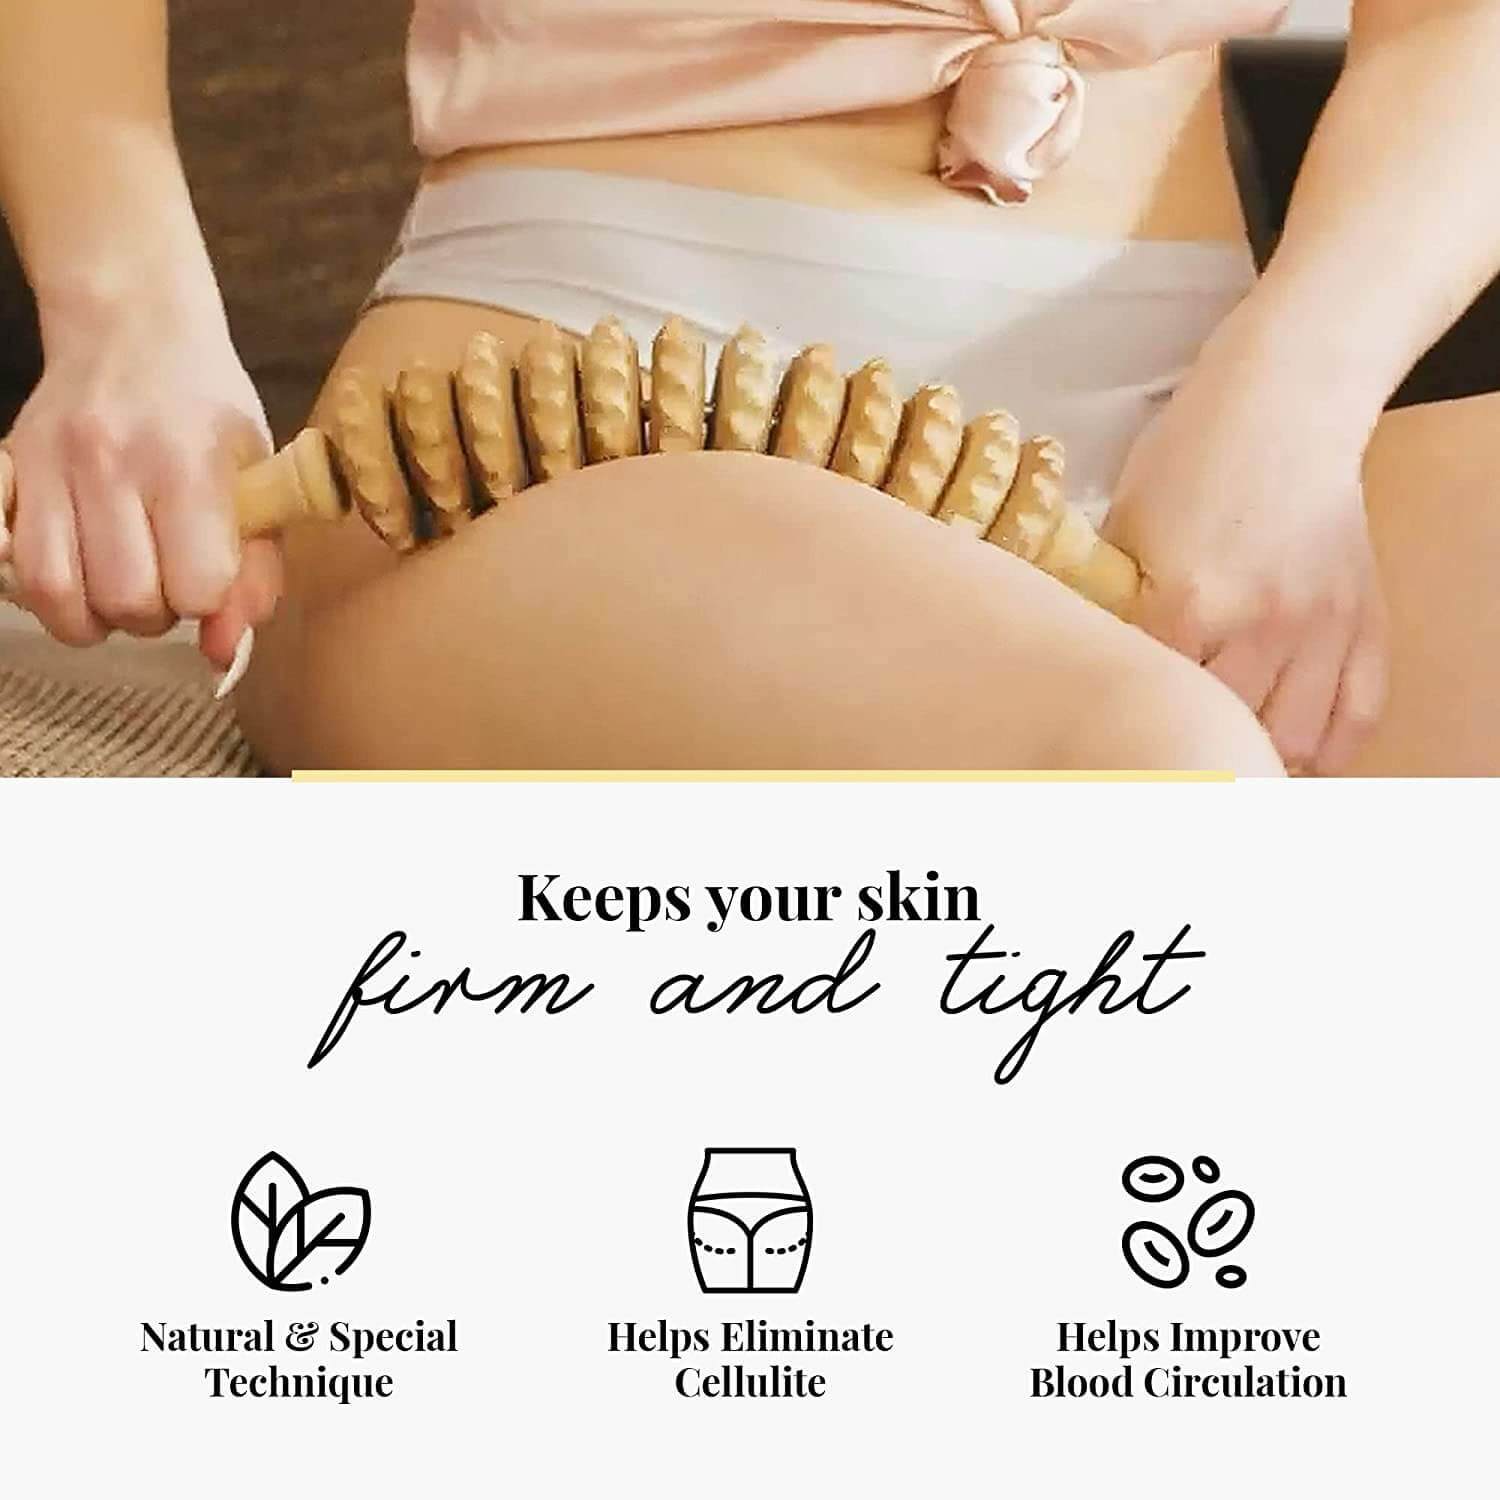 Keeps your skin firm and tight - Natural Technique